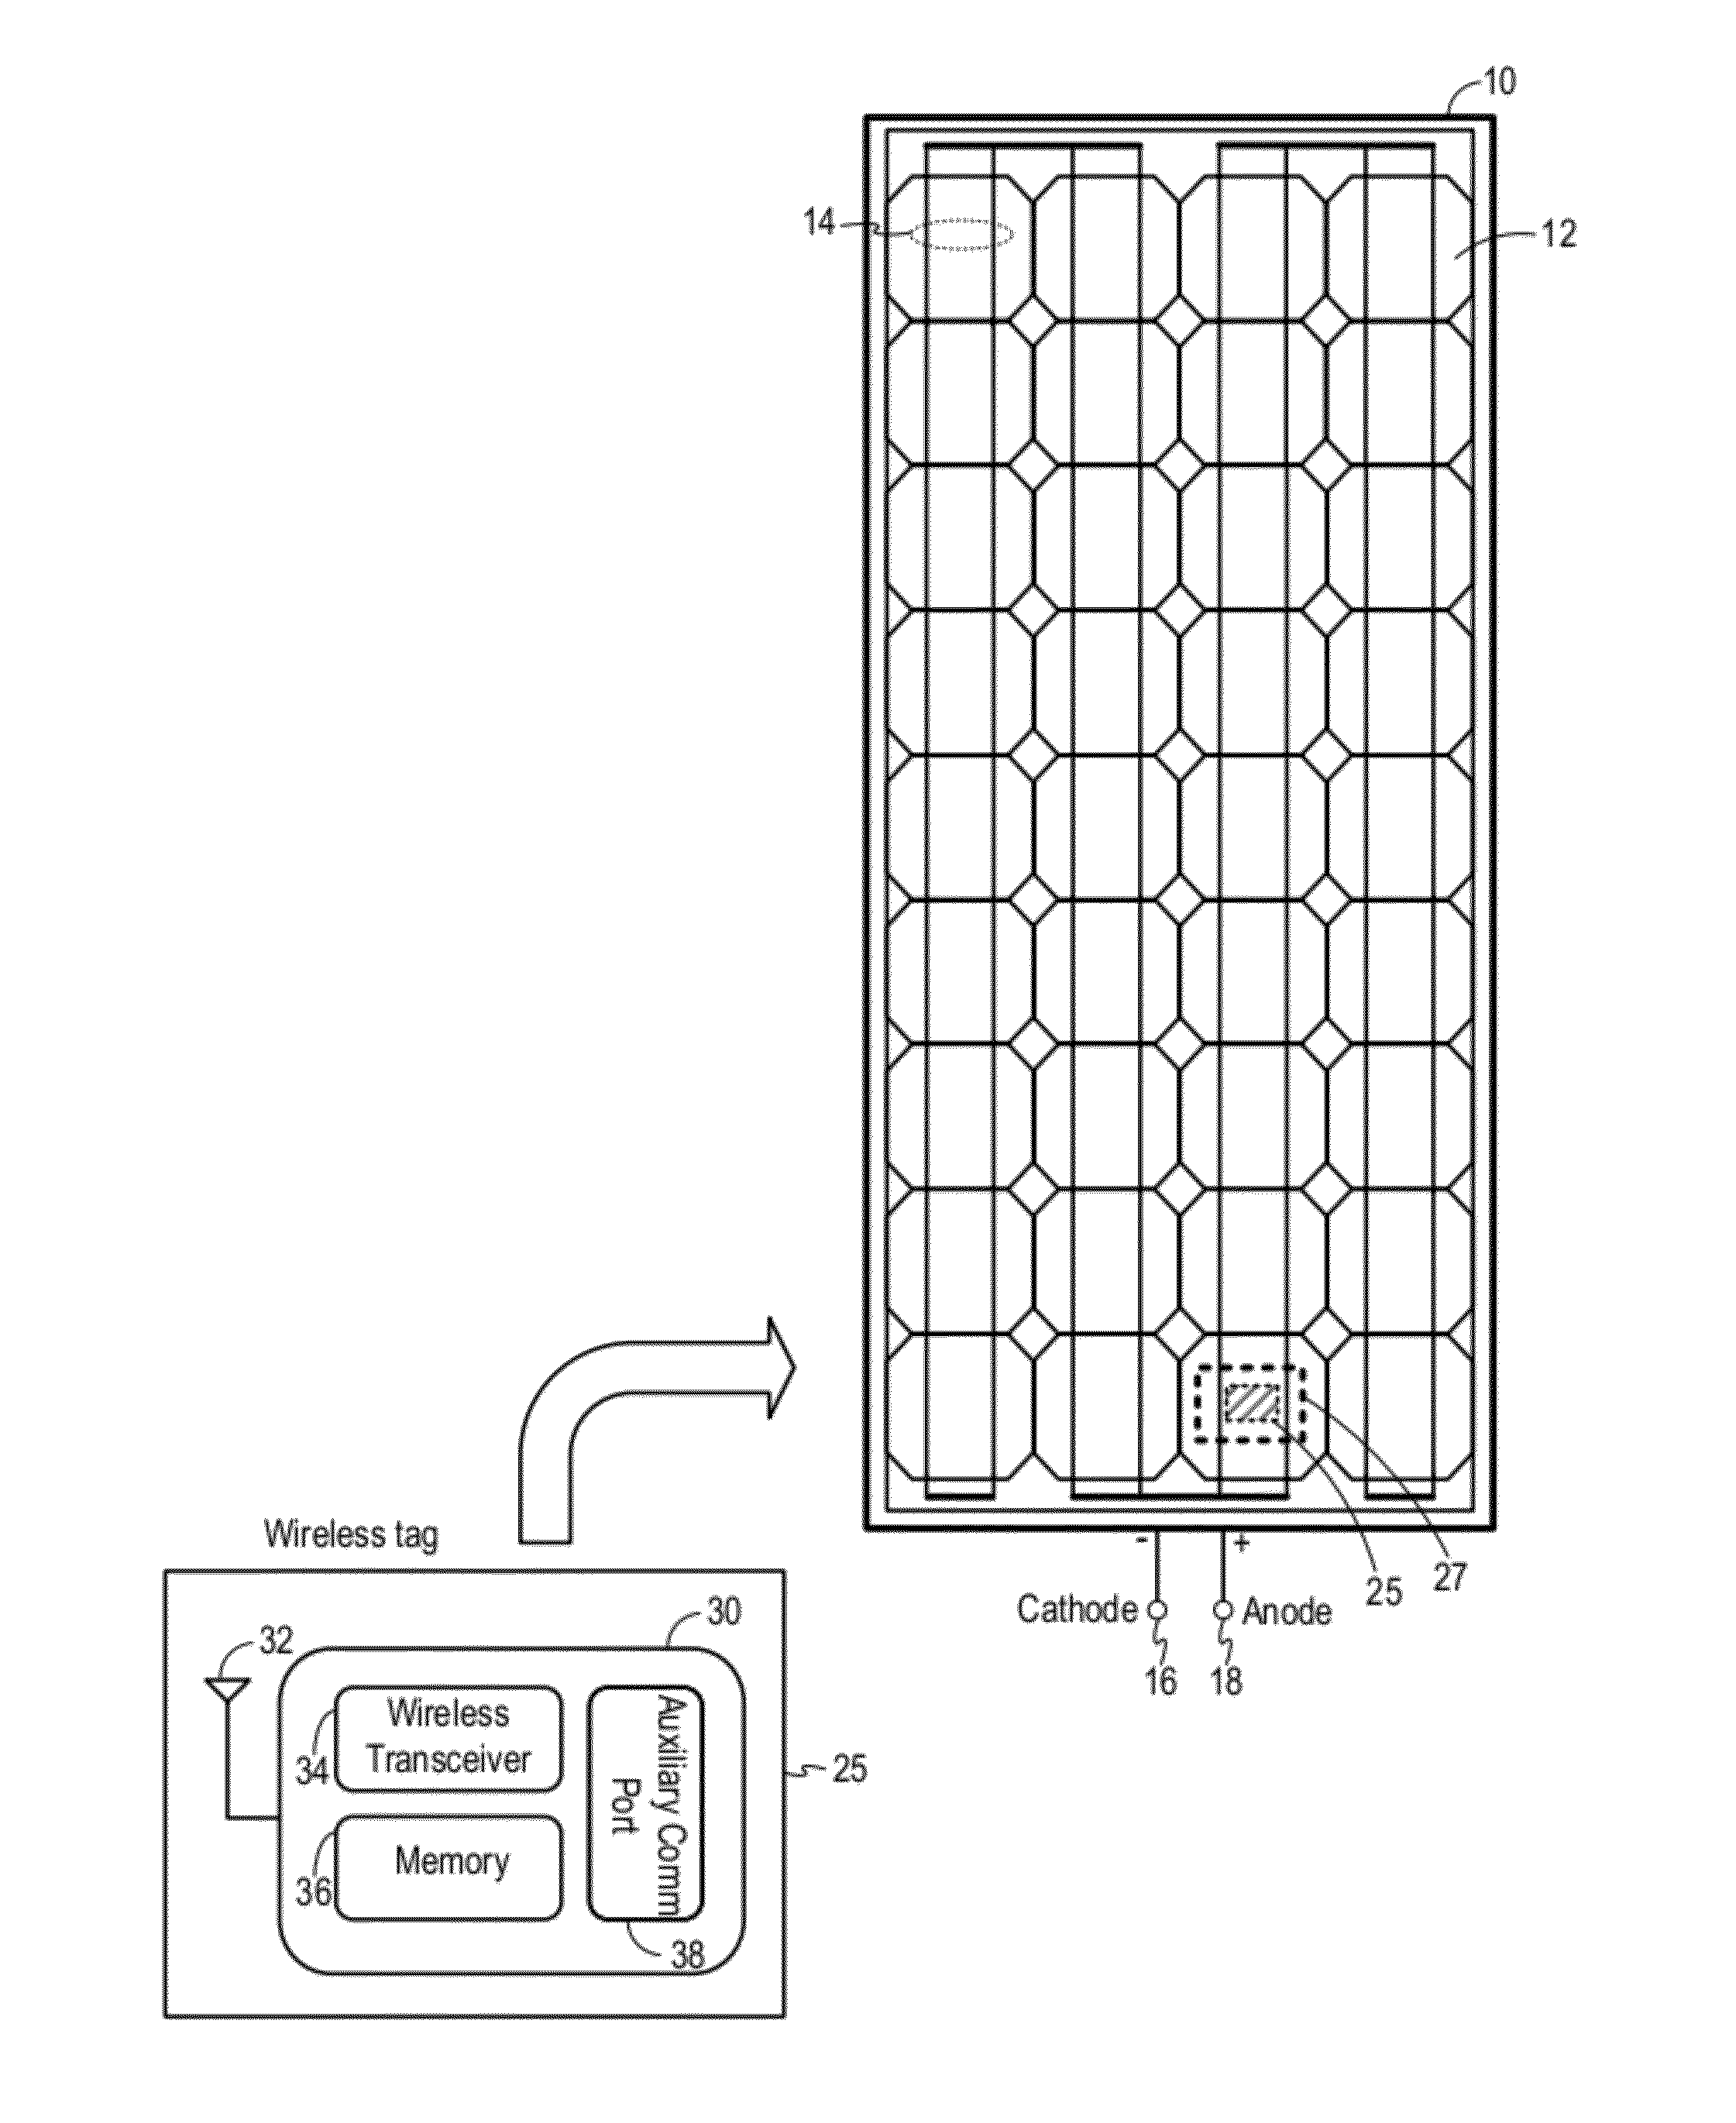 System and Method For Storing Panel-Specific Data onto a Wireless Tag Affixed to a Solar Panel